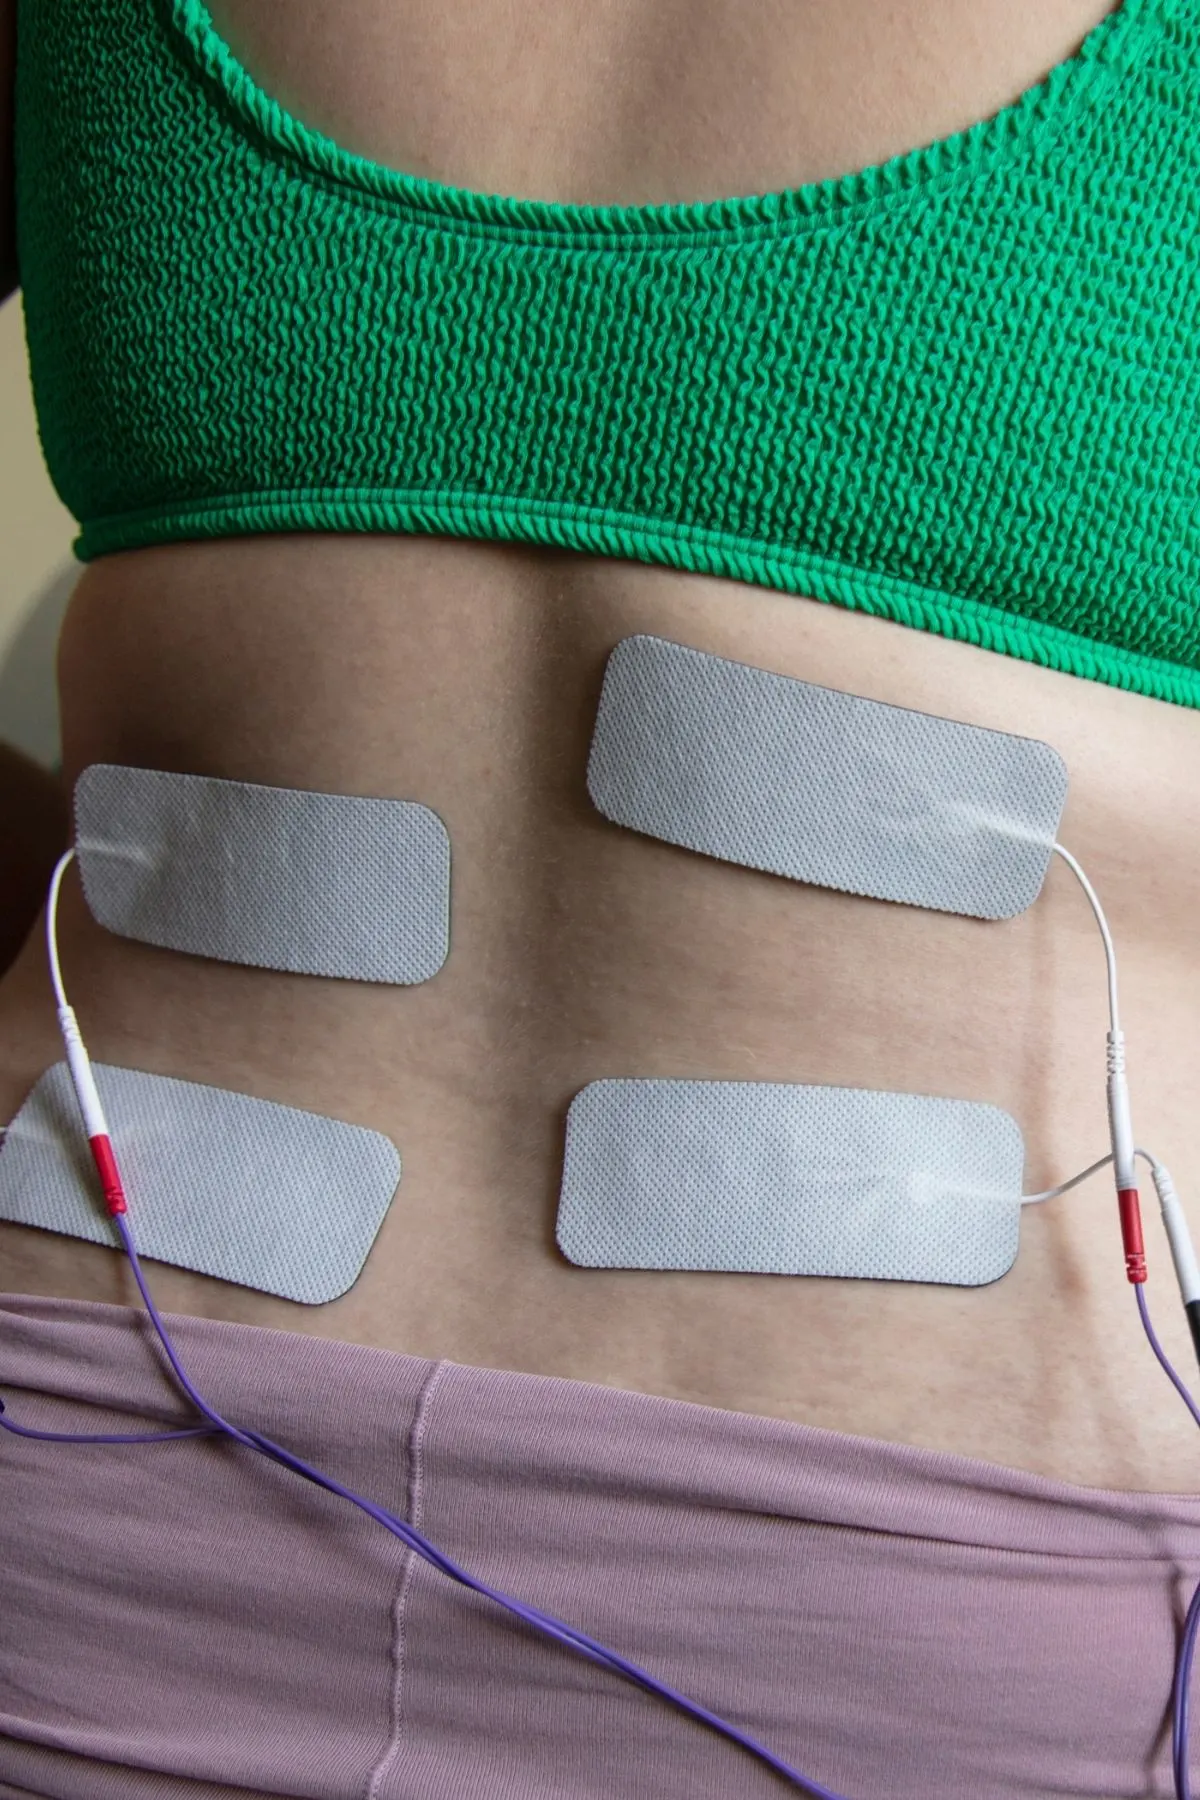 Woman shows her back patched with electrical wires from TENS machine during labor.